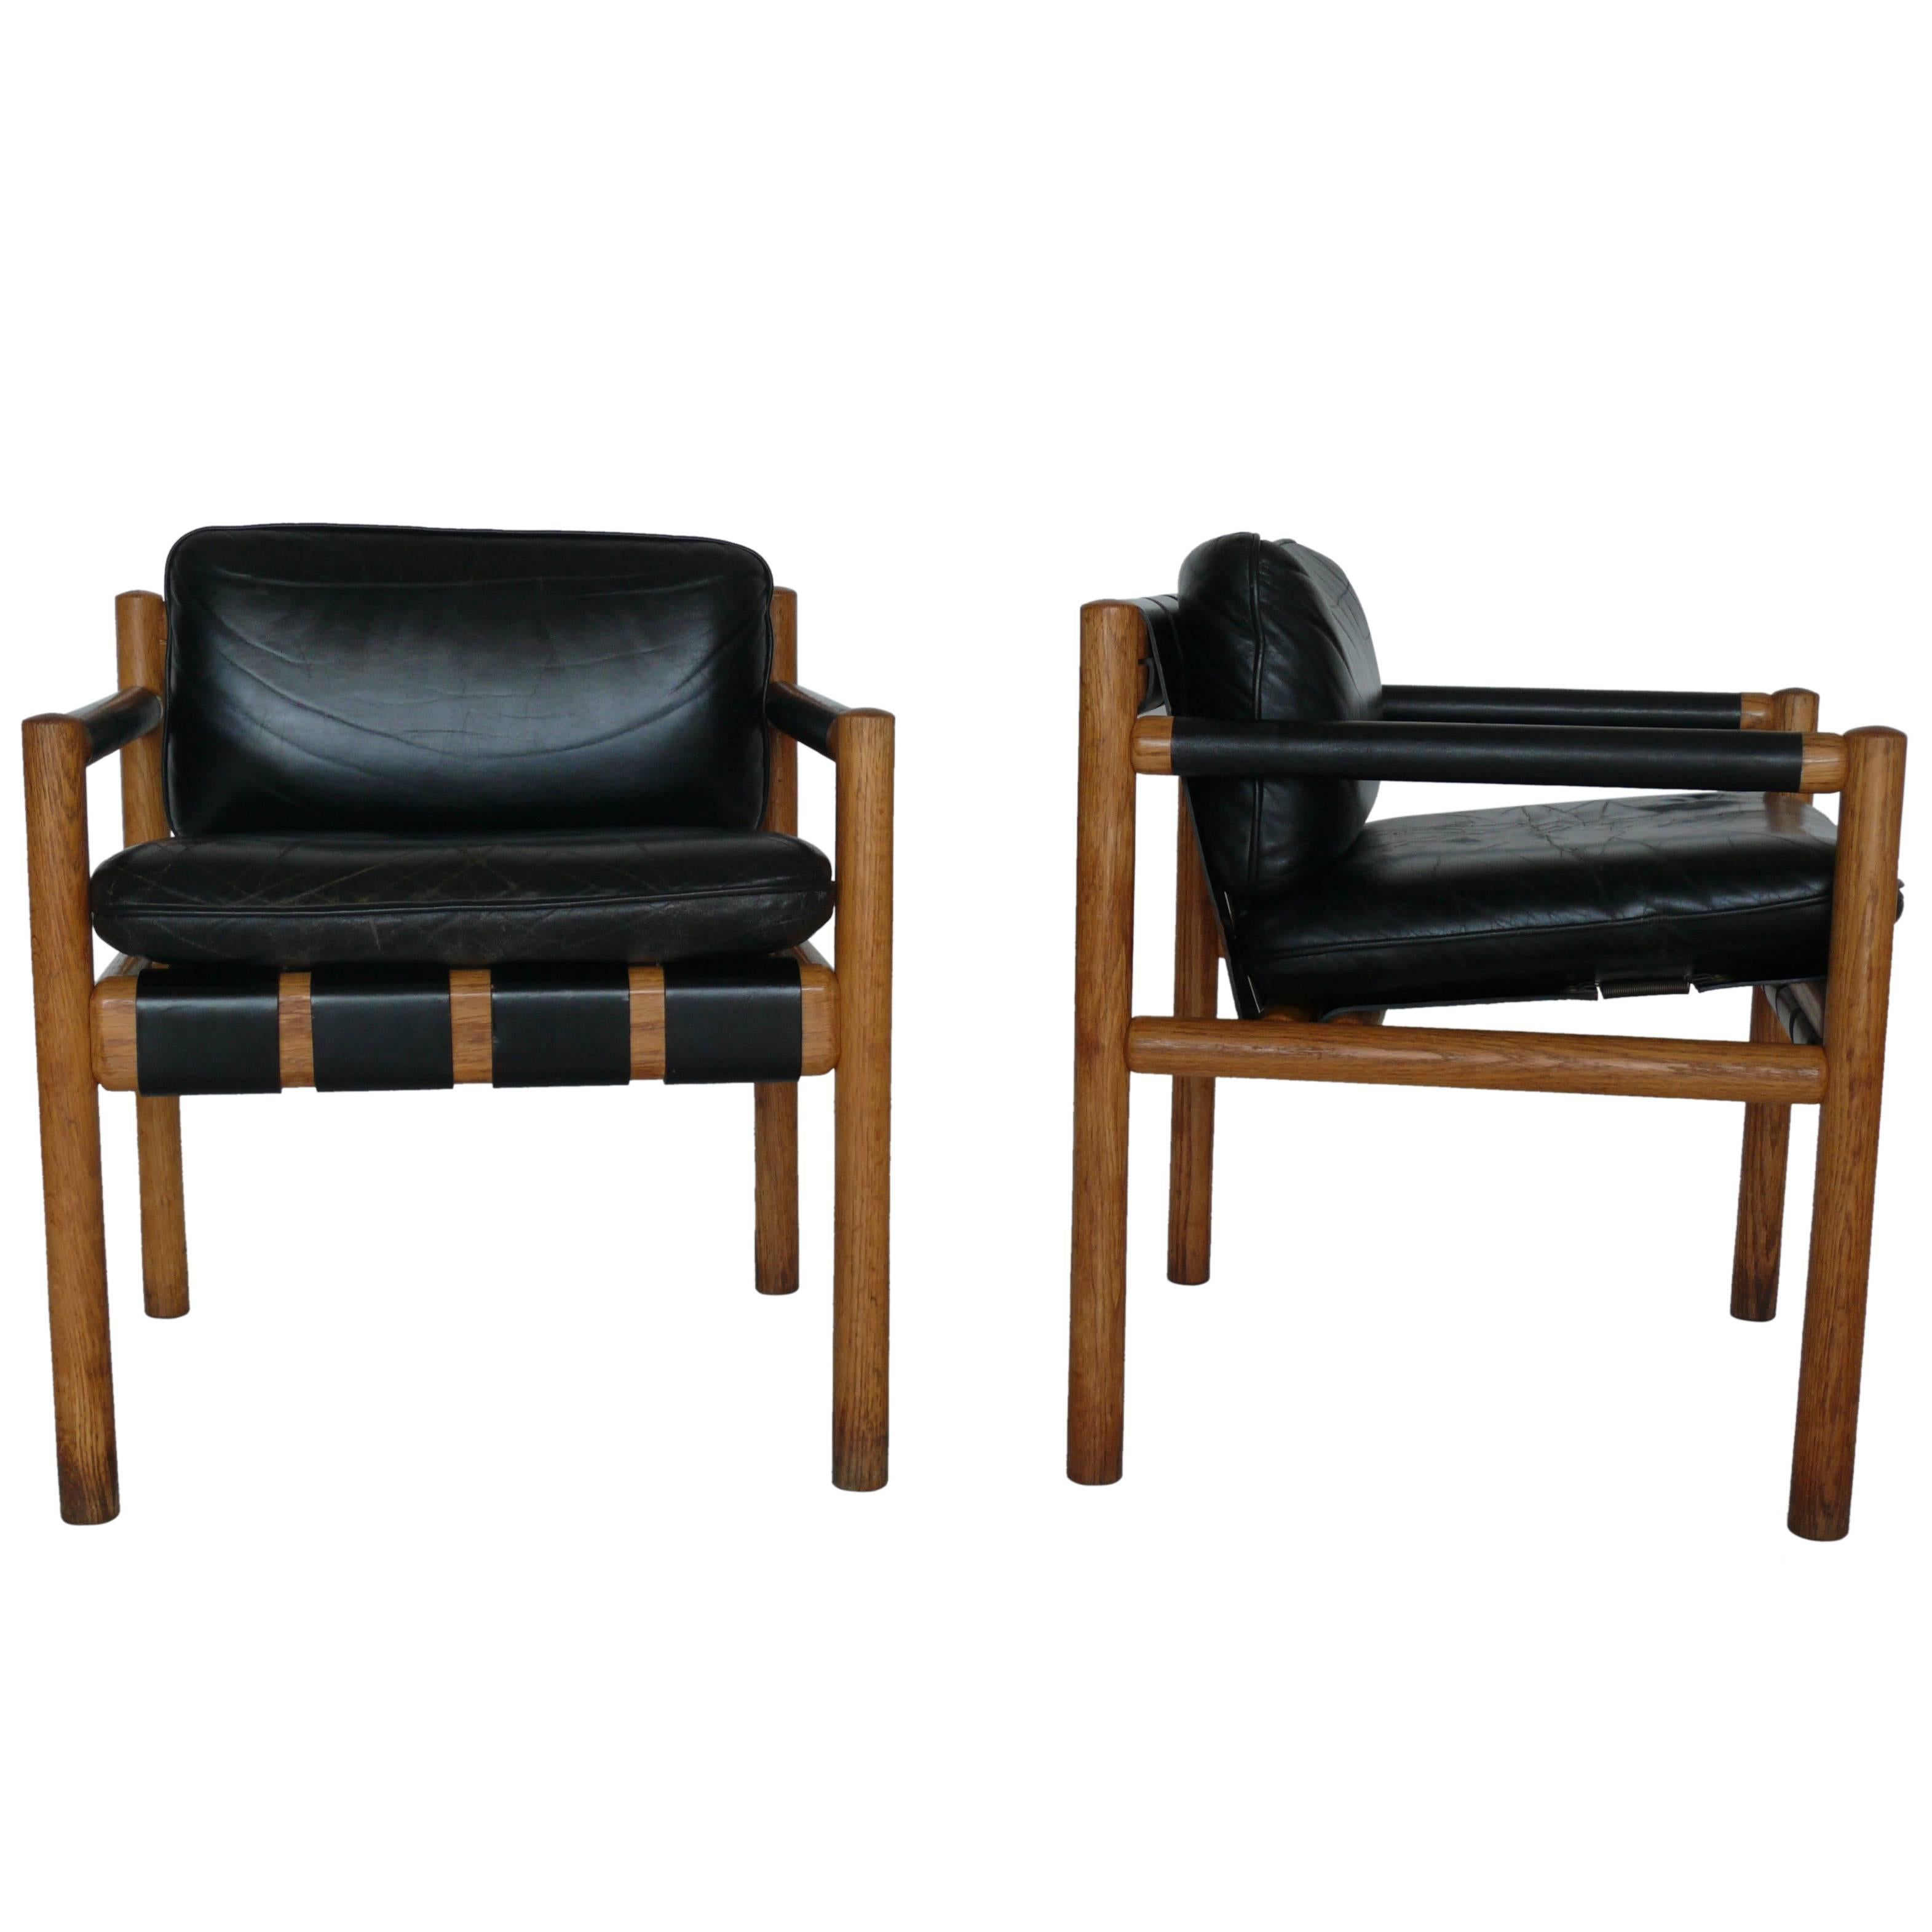 Pair of Chairs Attributed to Carlo Scarpa